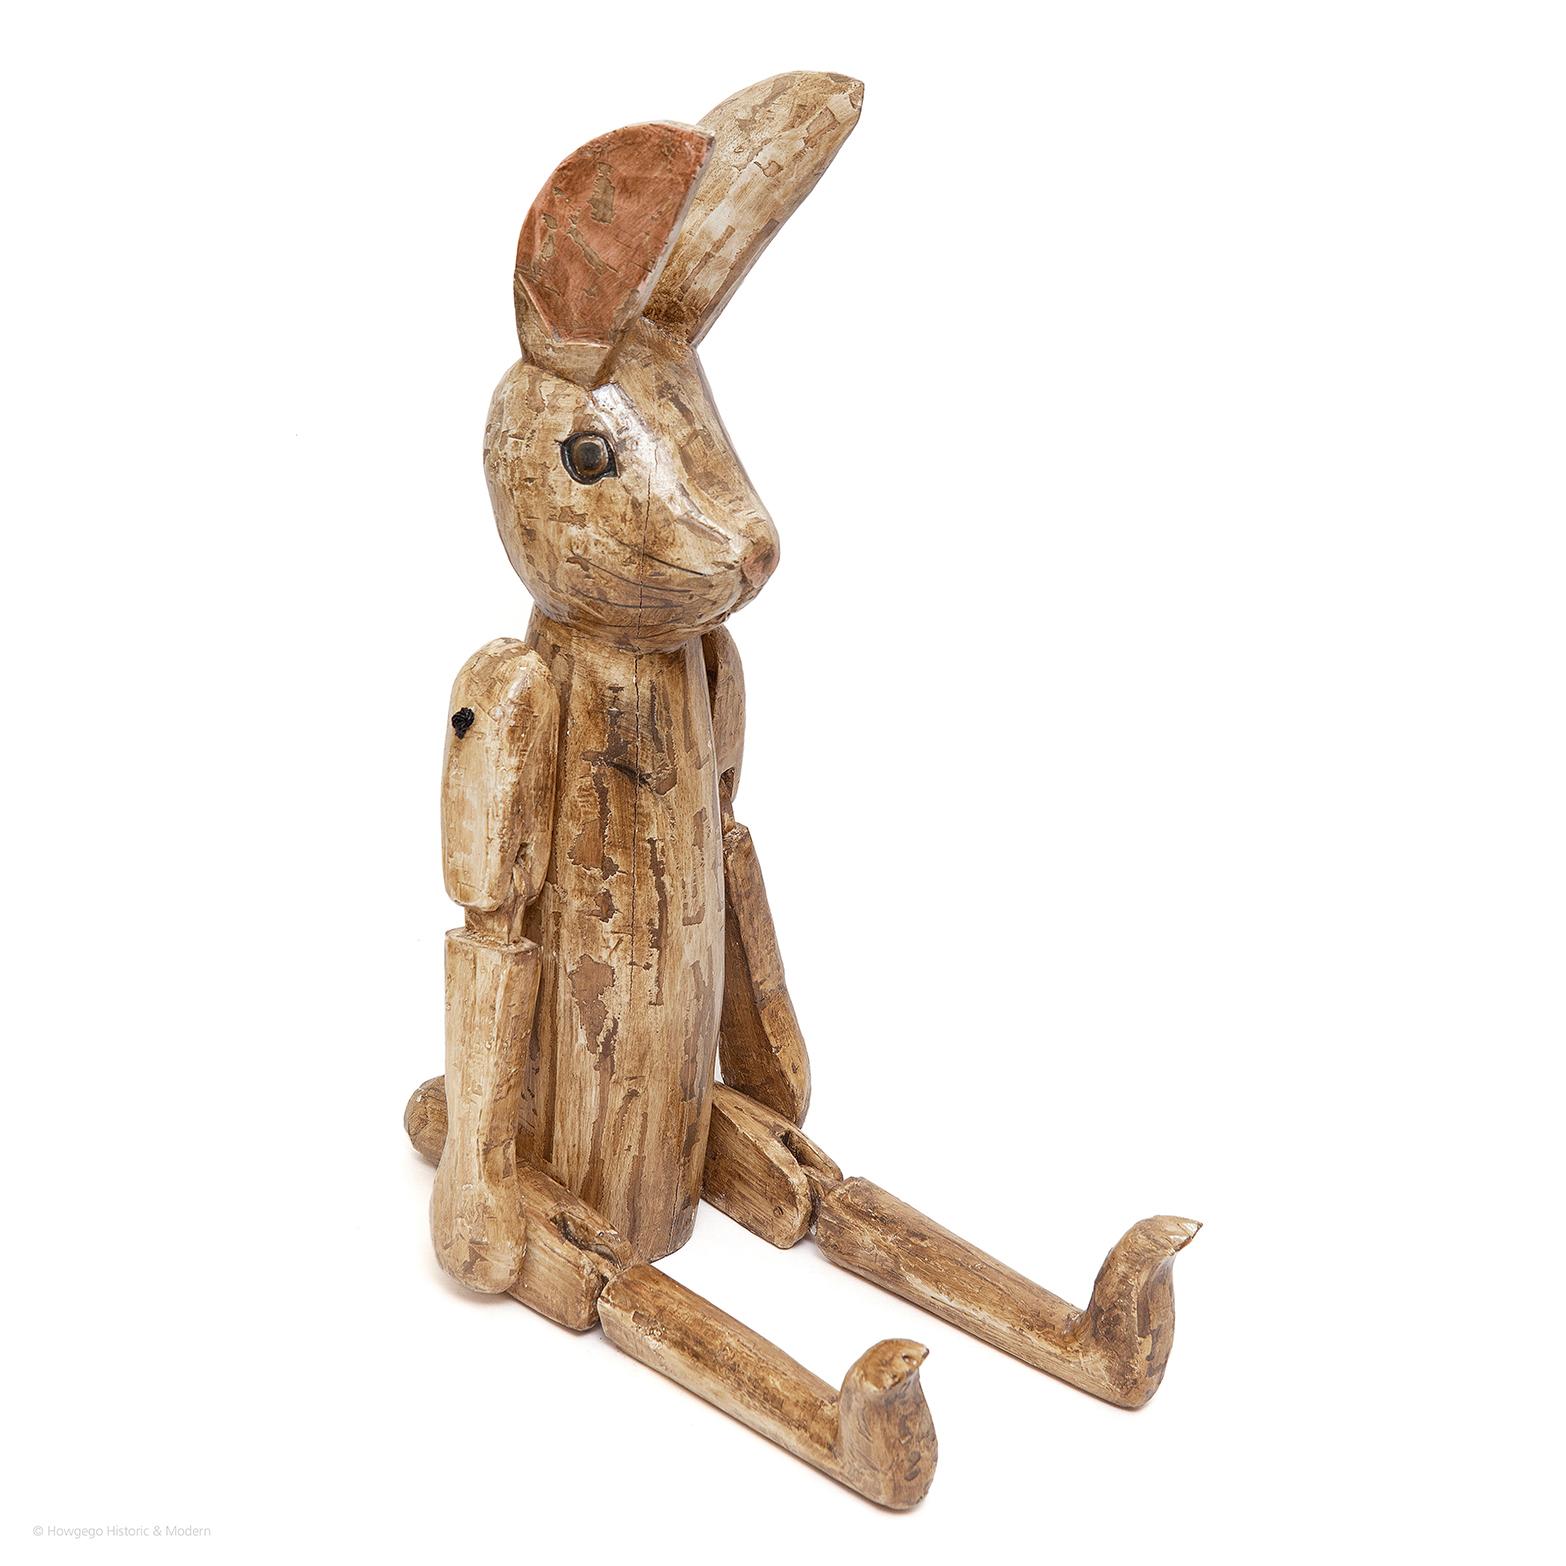 - Unusual and eclectic, most likely made as a sculptor's or artist's model. 
- This naive articulated sculpture of a rabbit has huge charm, tacticity and engaging playfulness
- Conversation piece.

Measures: Height (seated) - 48cm 
Length -